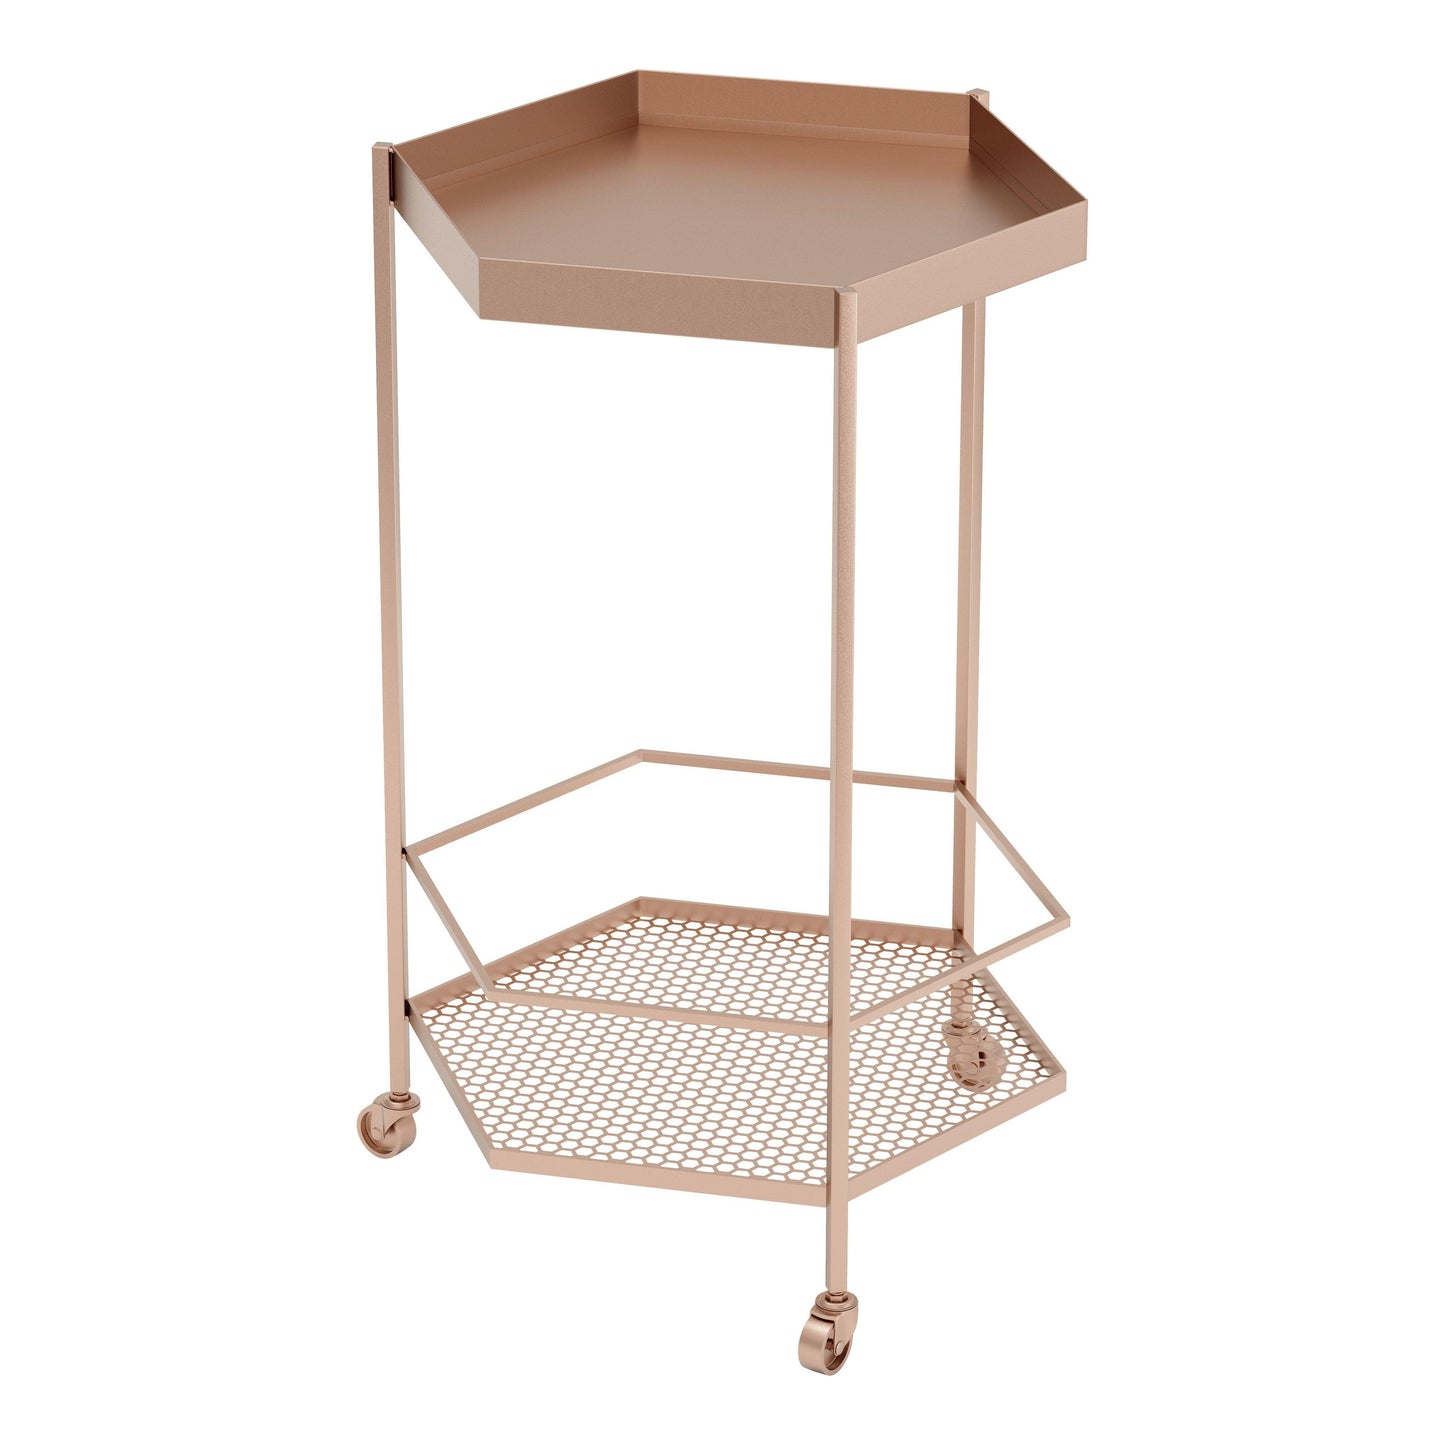 Hex Bar Cart Gold - Sideboards and Things Accents_Gold, Brand_Zuo Modern, Color_Gold, Depth_10-20, Features_With Wheels, Finish_Hand Painted, Height_20-30, Materials_Metal, Metal Type_Steel, Product Type_Bar Cart, Shape_Geometric, Shelf Material_Metal, Width_10-20